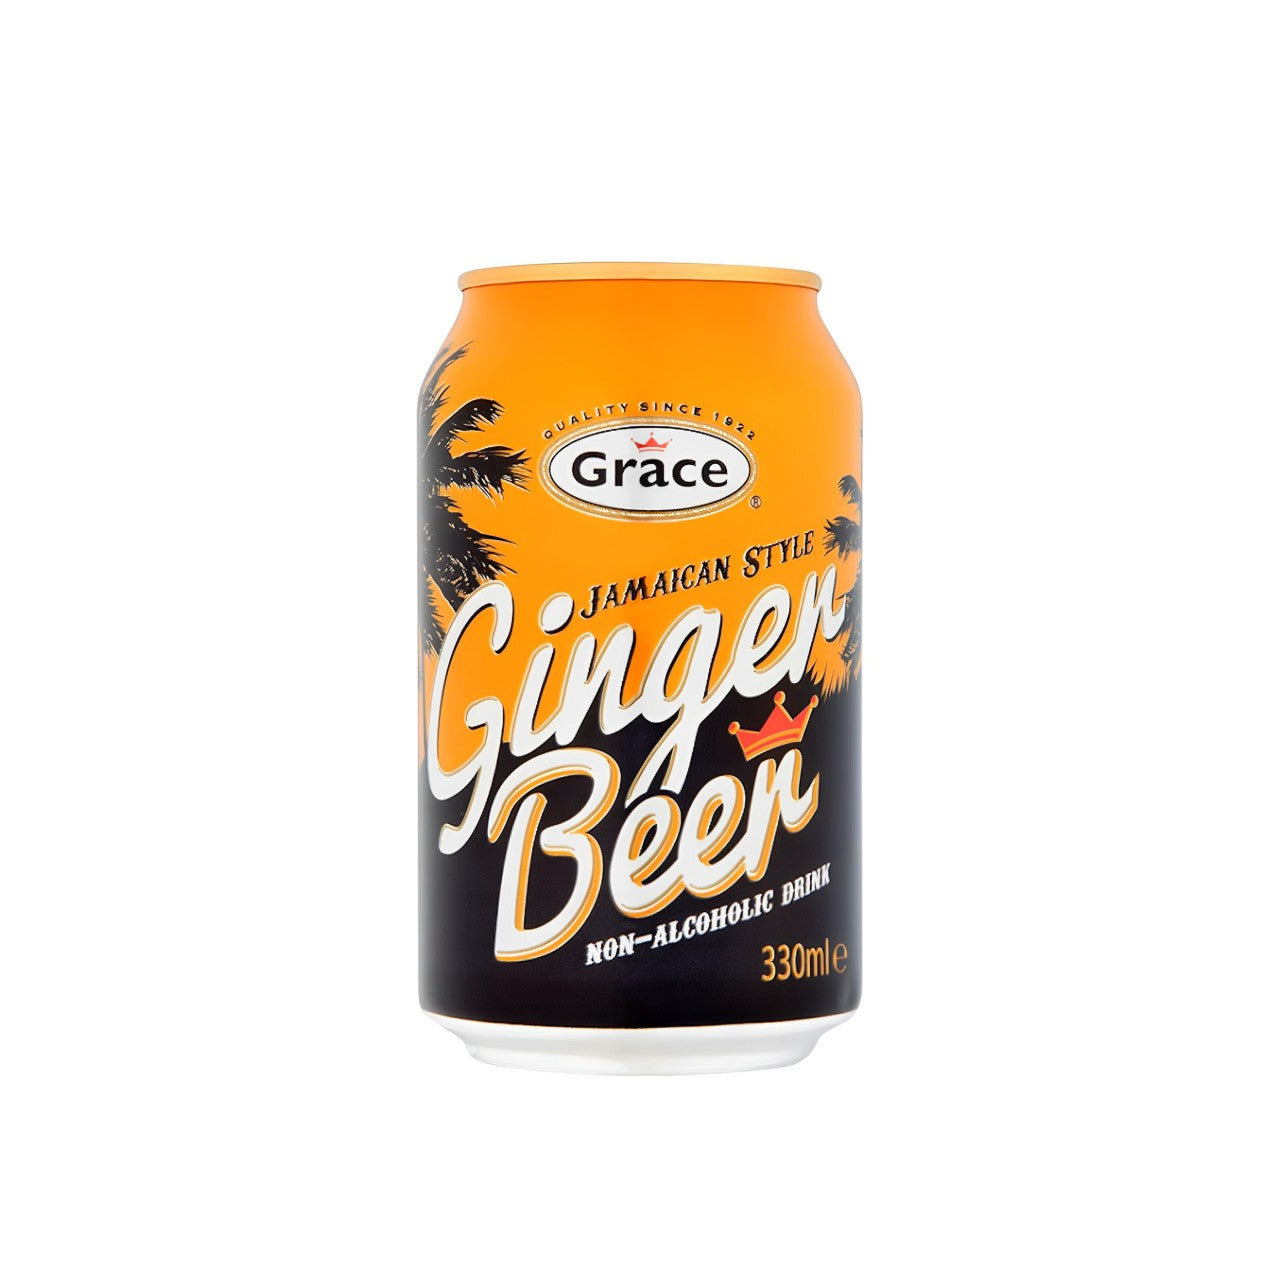 Grace Jamaican Style Ginger Beer 330ml